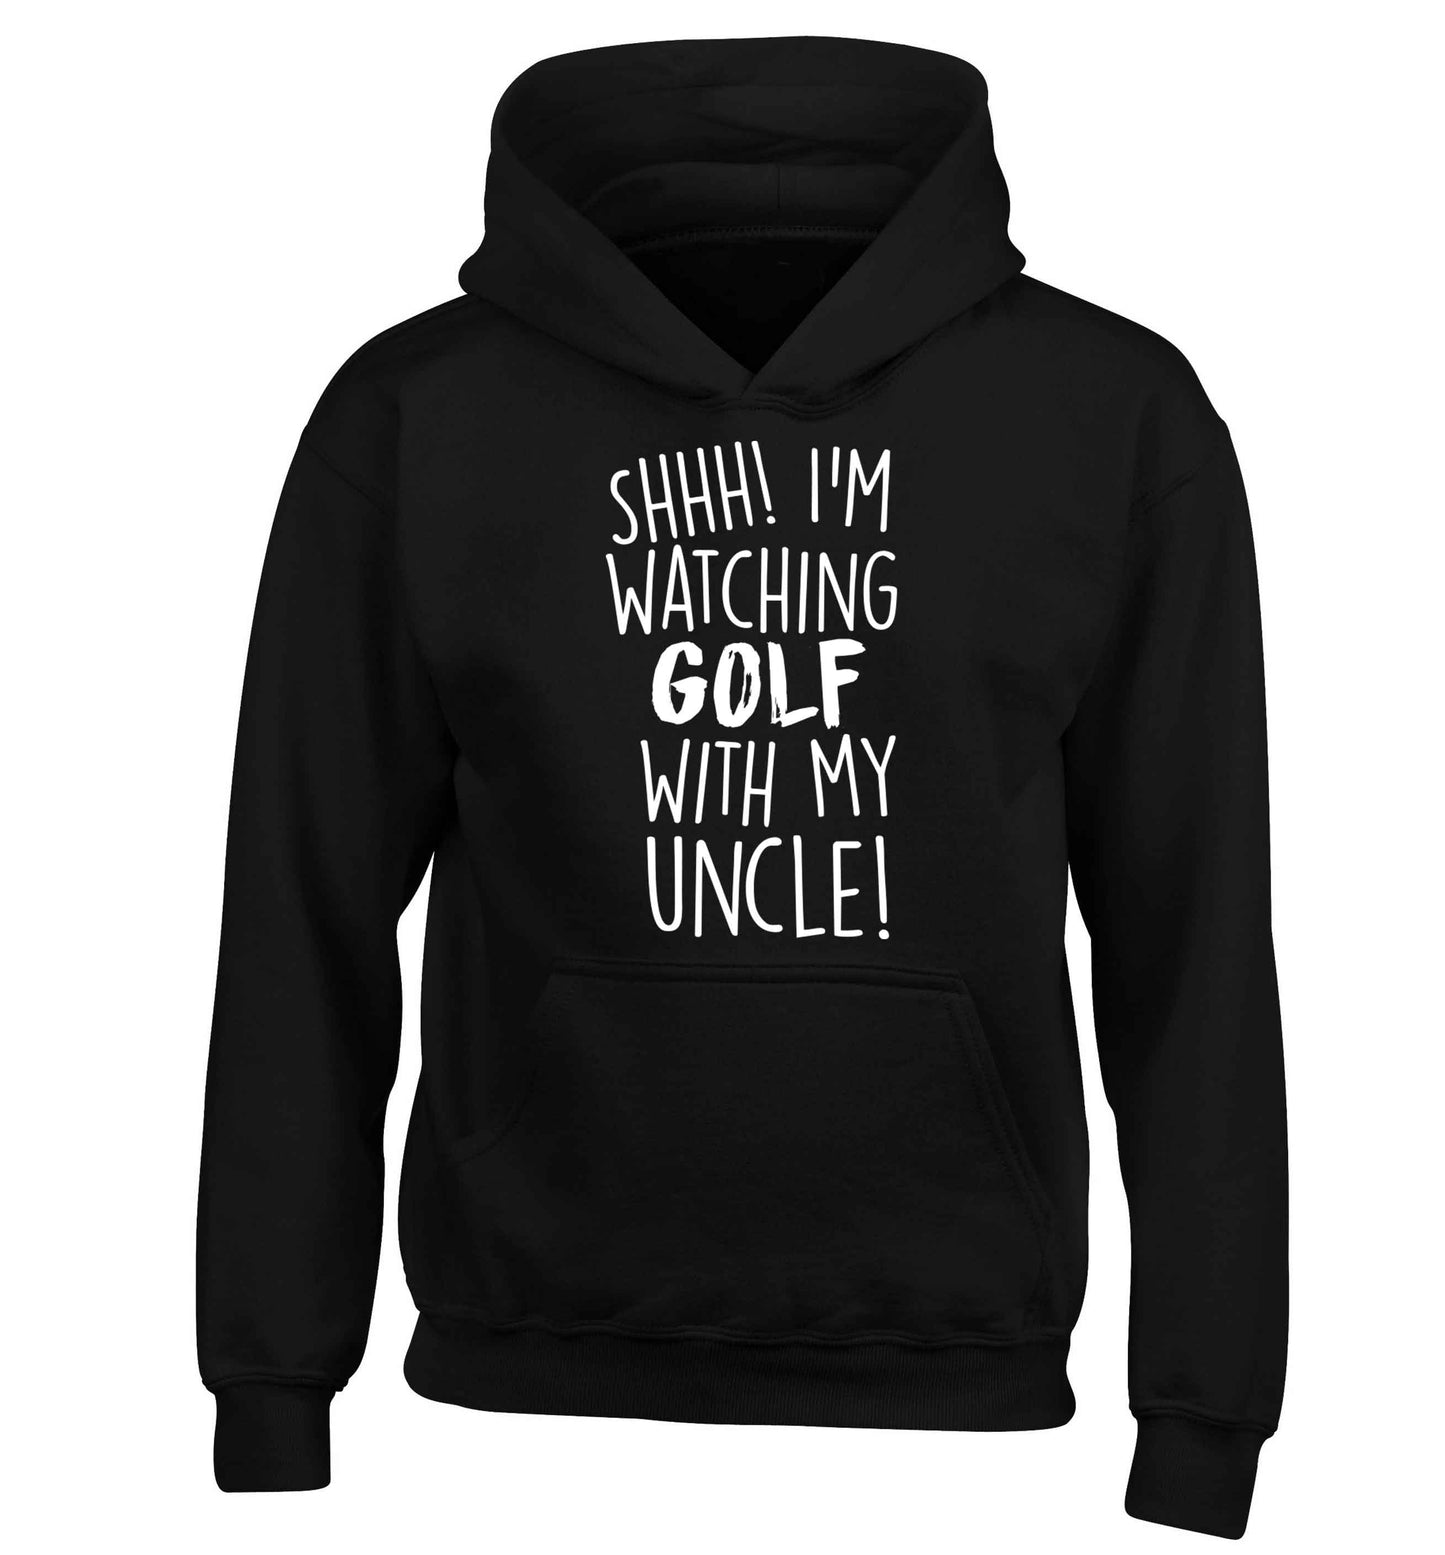 Shh I'm watching golf with my uncle children's black hoodie 12-13 Years